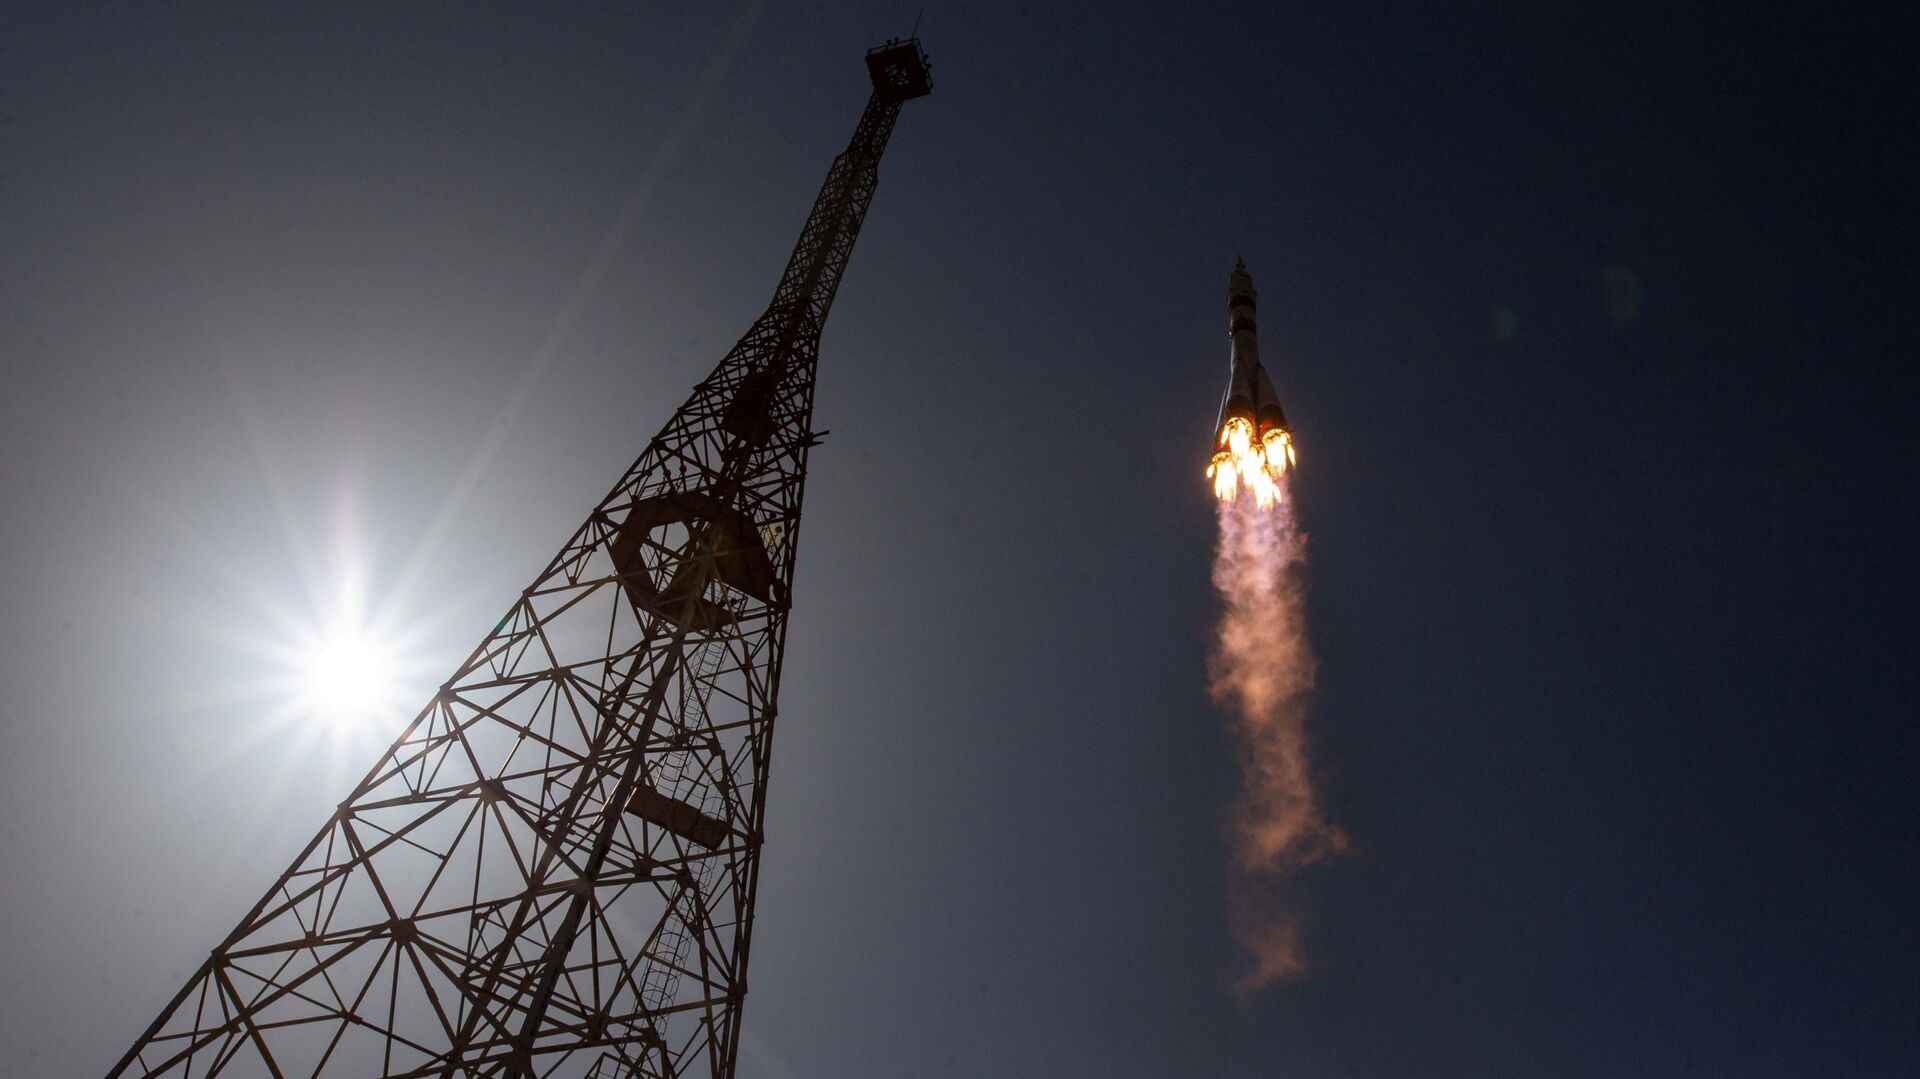 The Soyuz MS-18 spacecraft carrying the crew formed of Mark Vande Hei of NASA and cosmonauts Oleg Novitskiy and Pyotr Dubrov of Roscosmos blasts off to the International Space Station (ISS) from the launchpad at the Baikonur Cosmodrome, Kazakhstan April 9, 2021. - Sputnik International, 1920, 17.10.2021